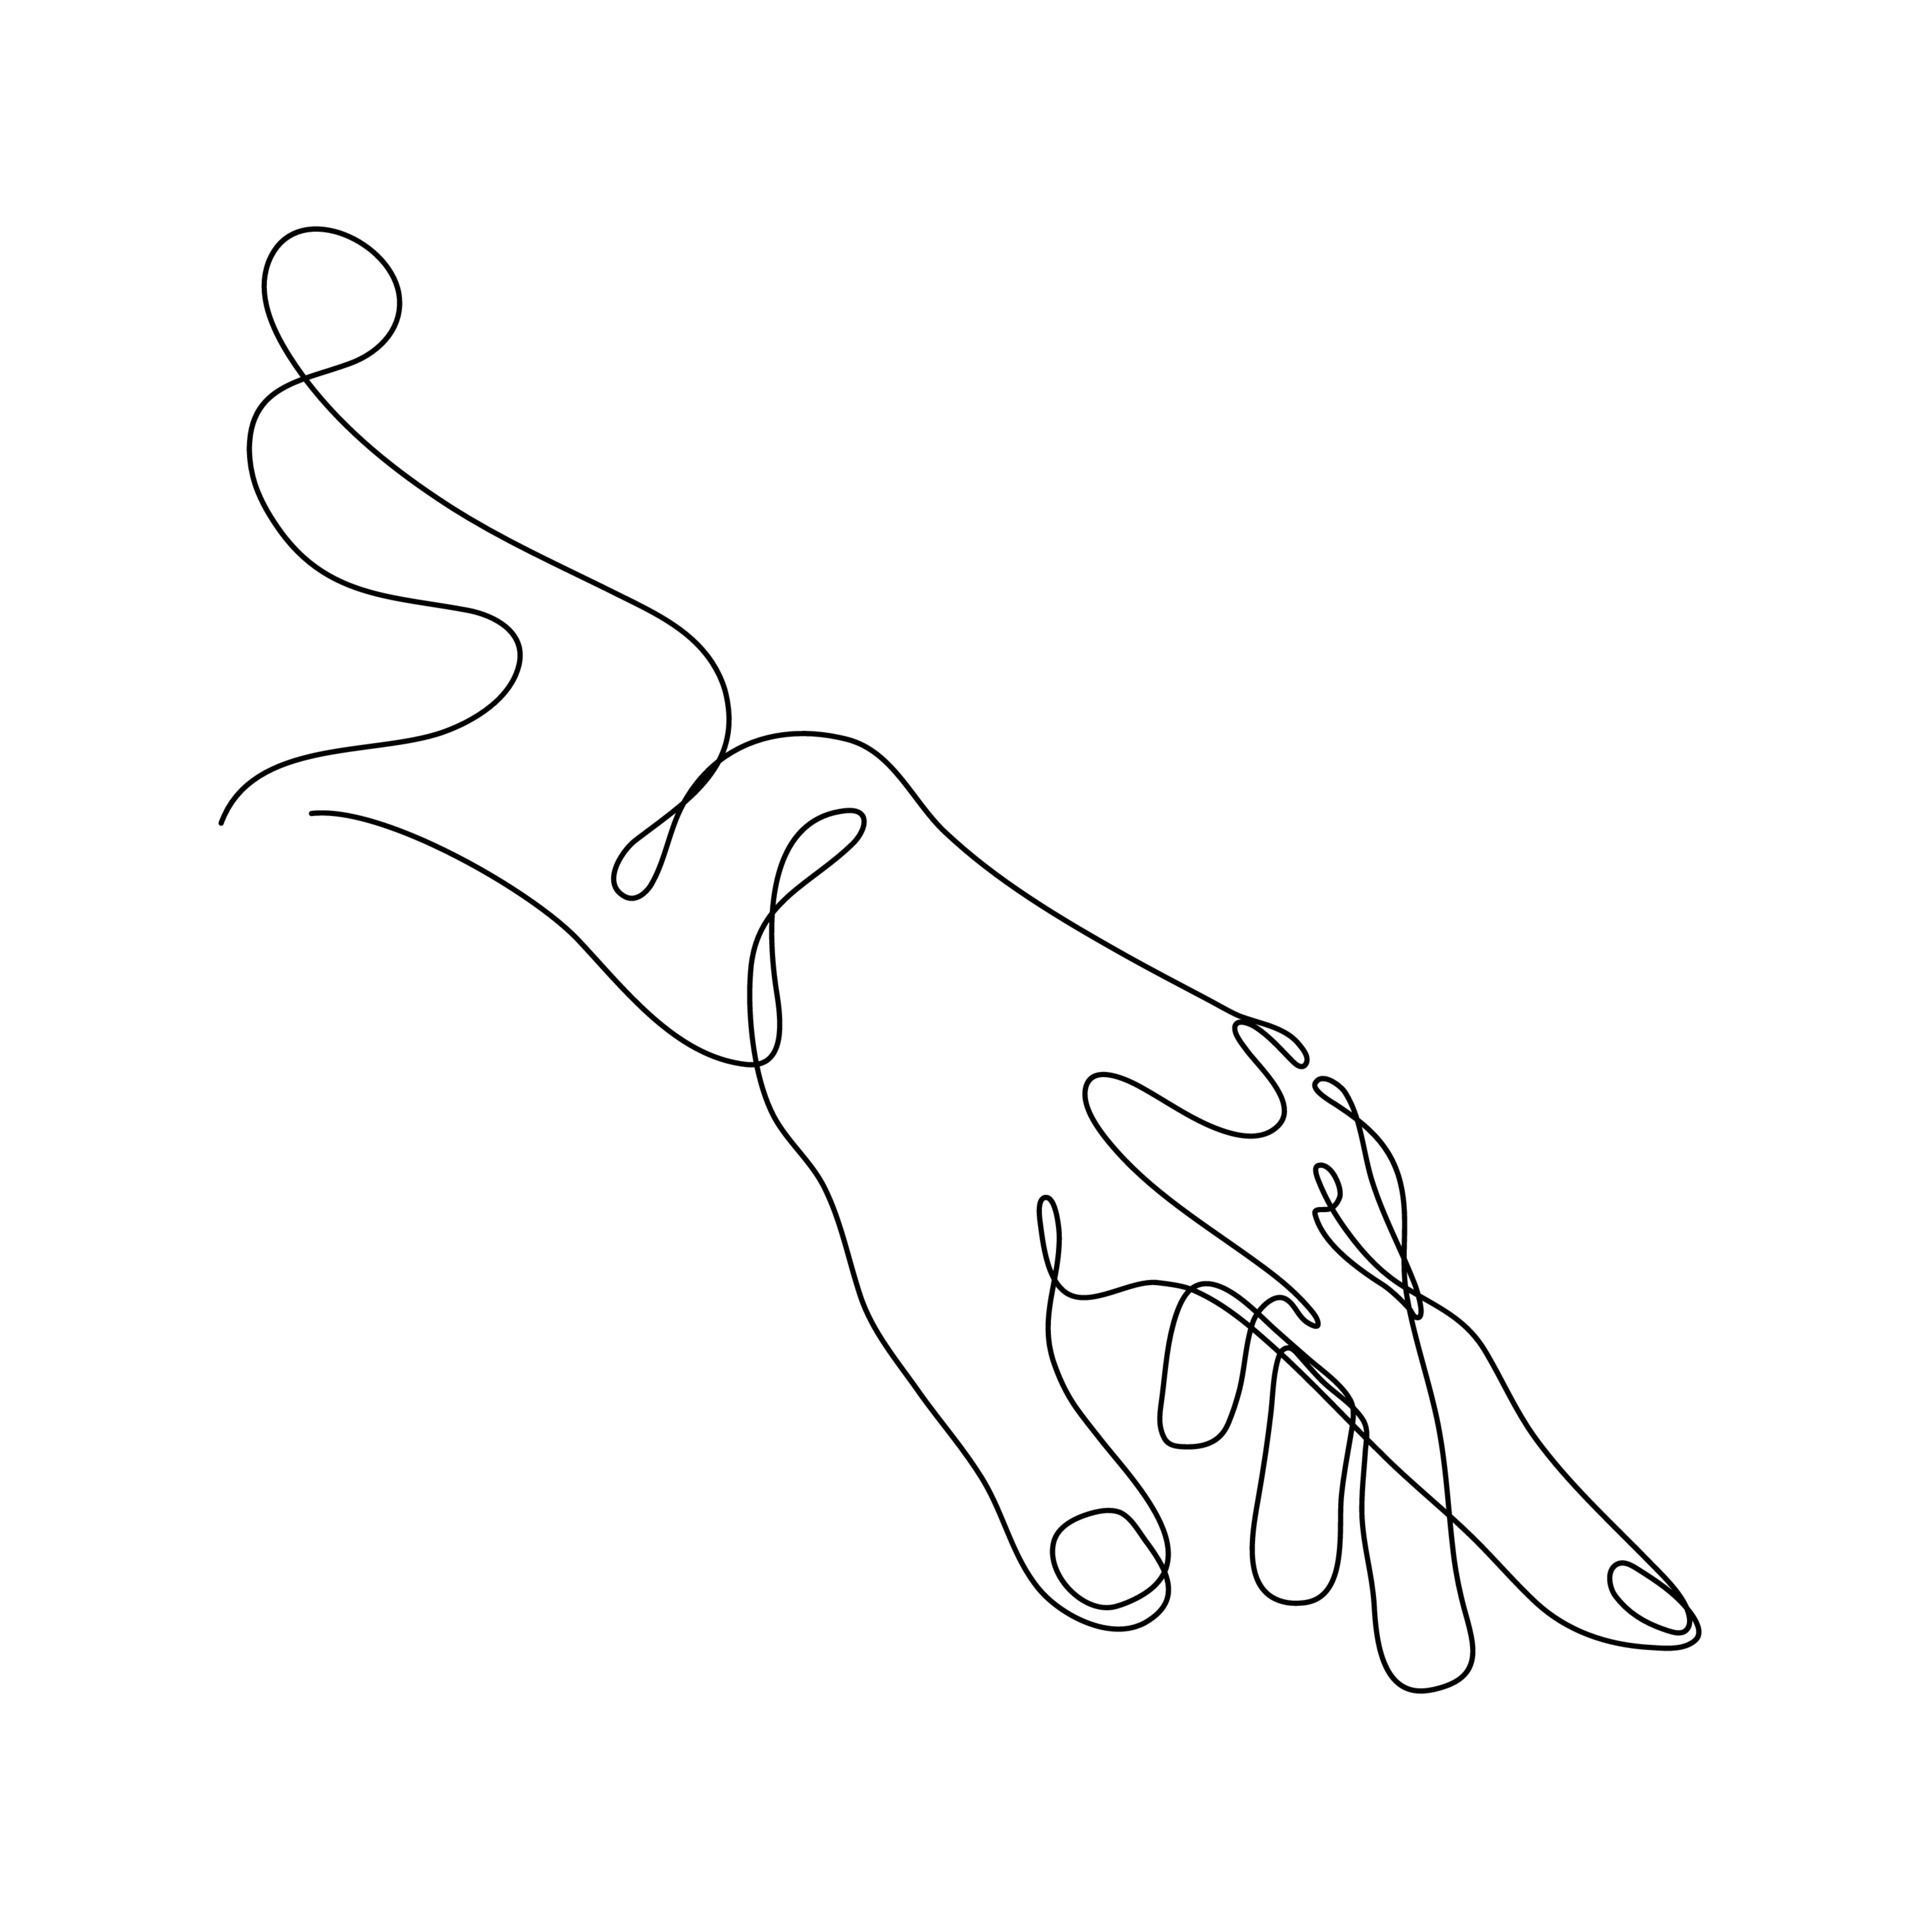 Two hands, one above the other, interweaving fingers - Hand drawn